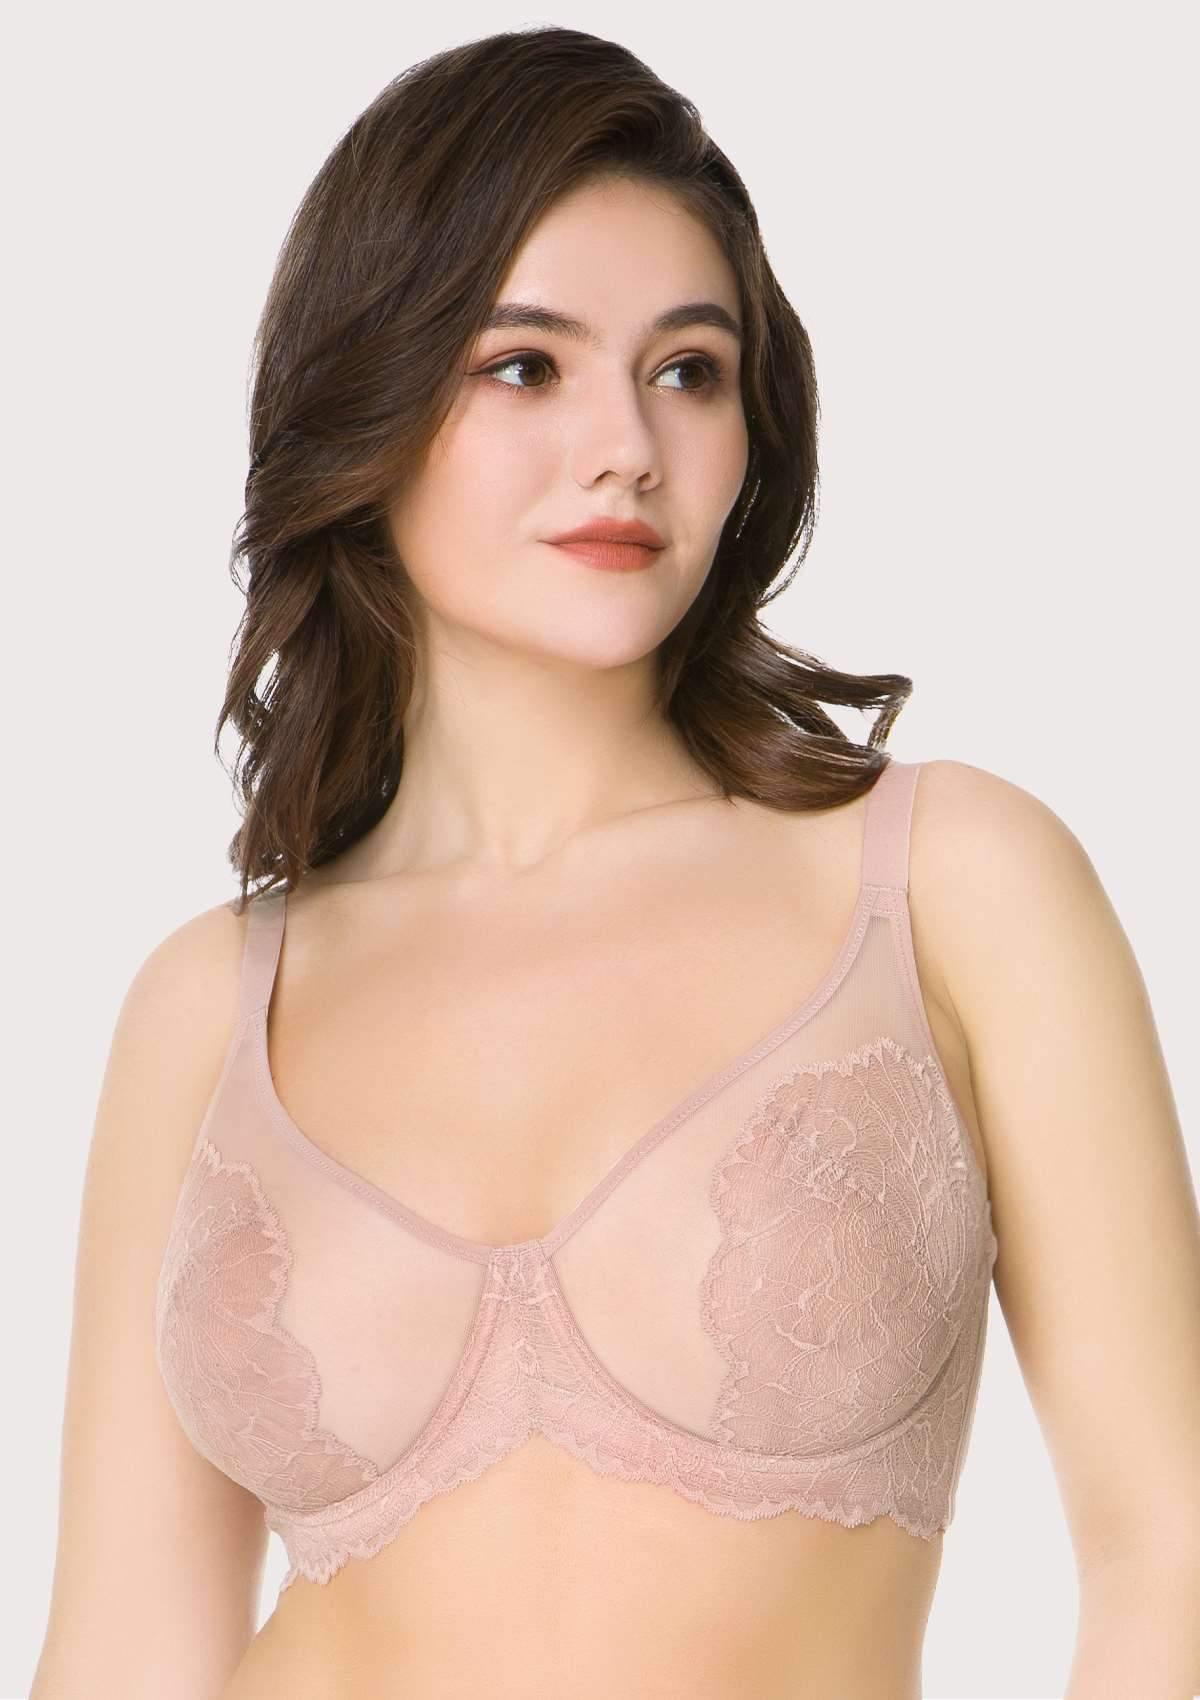 HSIA Blossom Lace Bra And Panties Set: Best Bra For Large Busts - Dark Pink / 36 / I